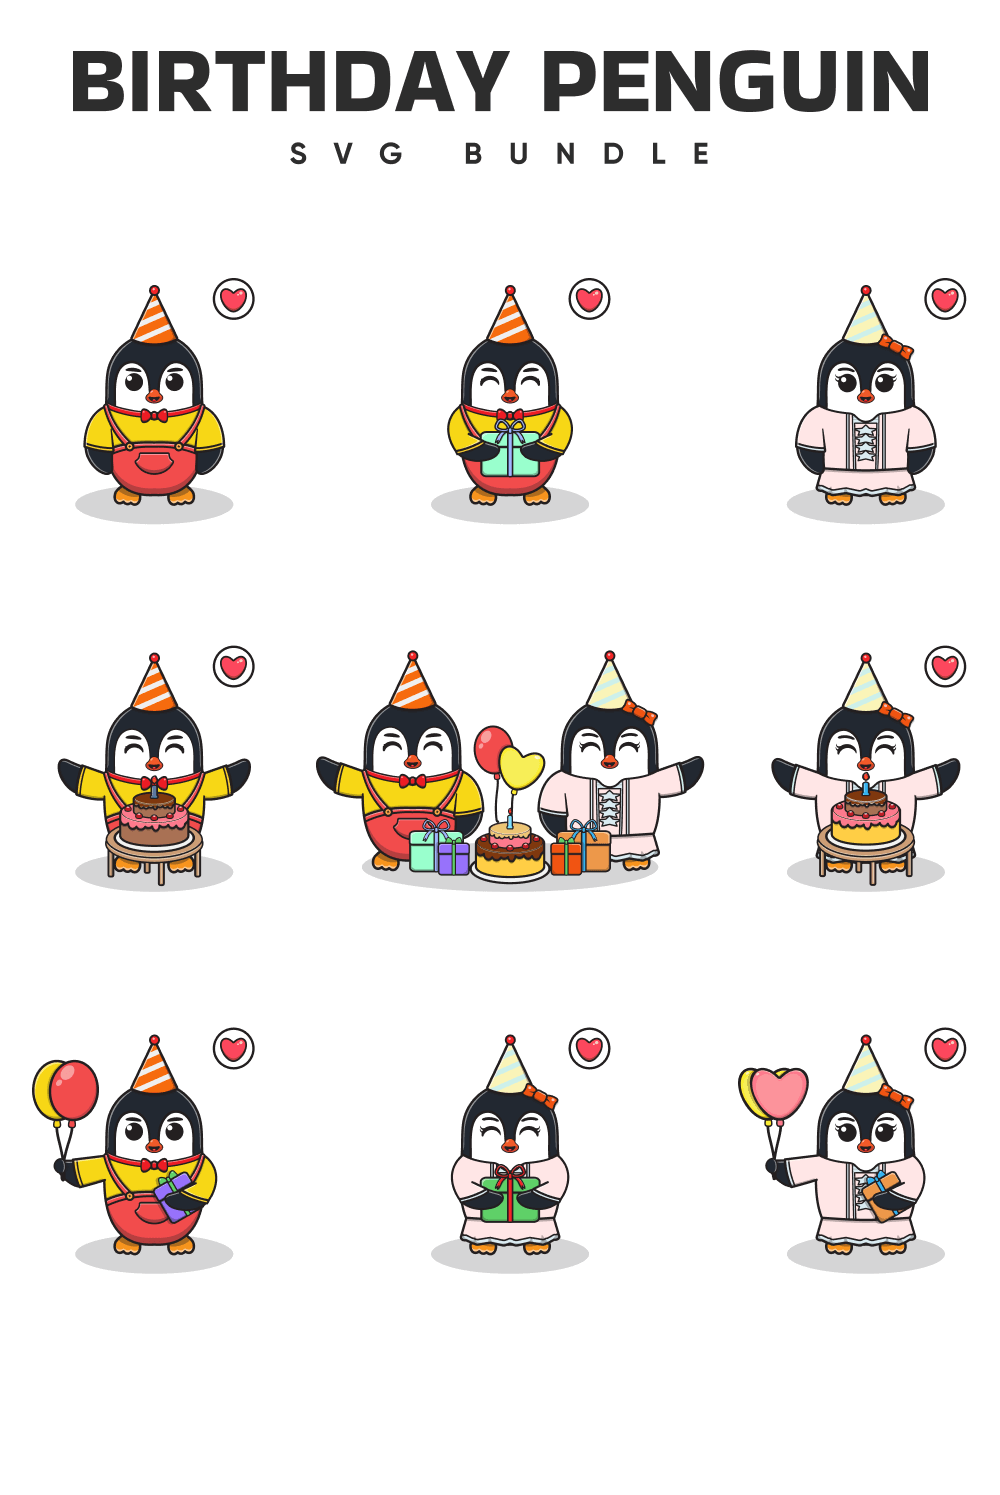 Bunch of cartoon penguins with birthday hats.